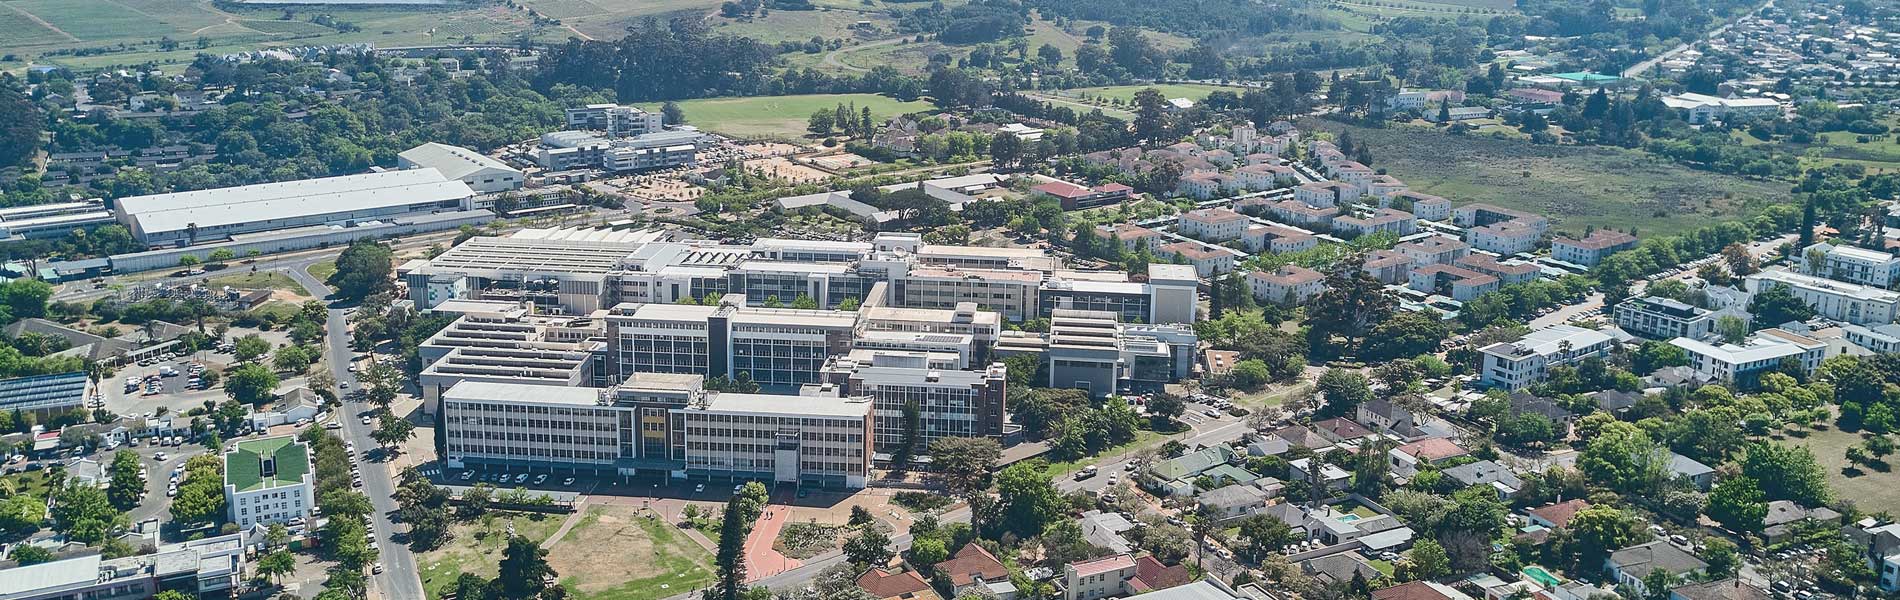 Aerial photo of the Faculty of Engineering, Stellenbosch University.